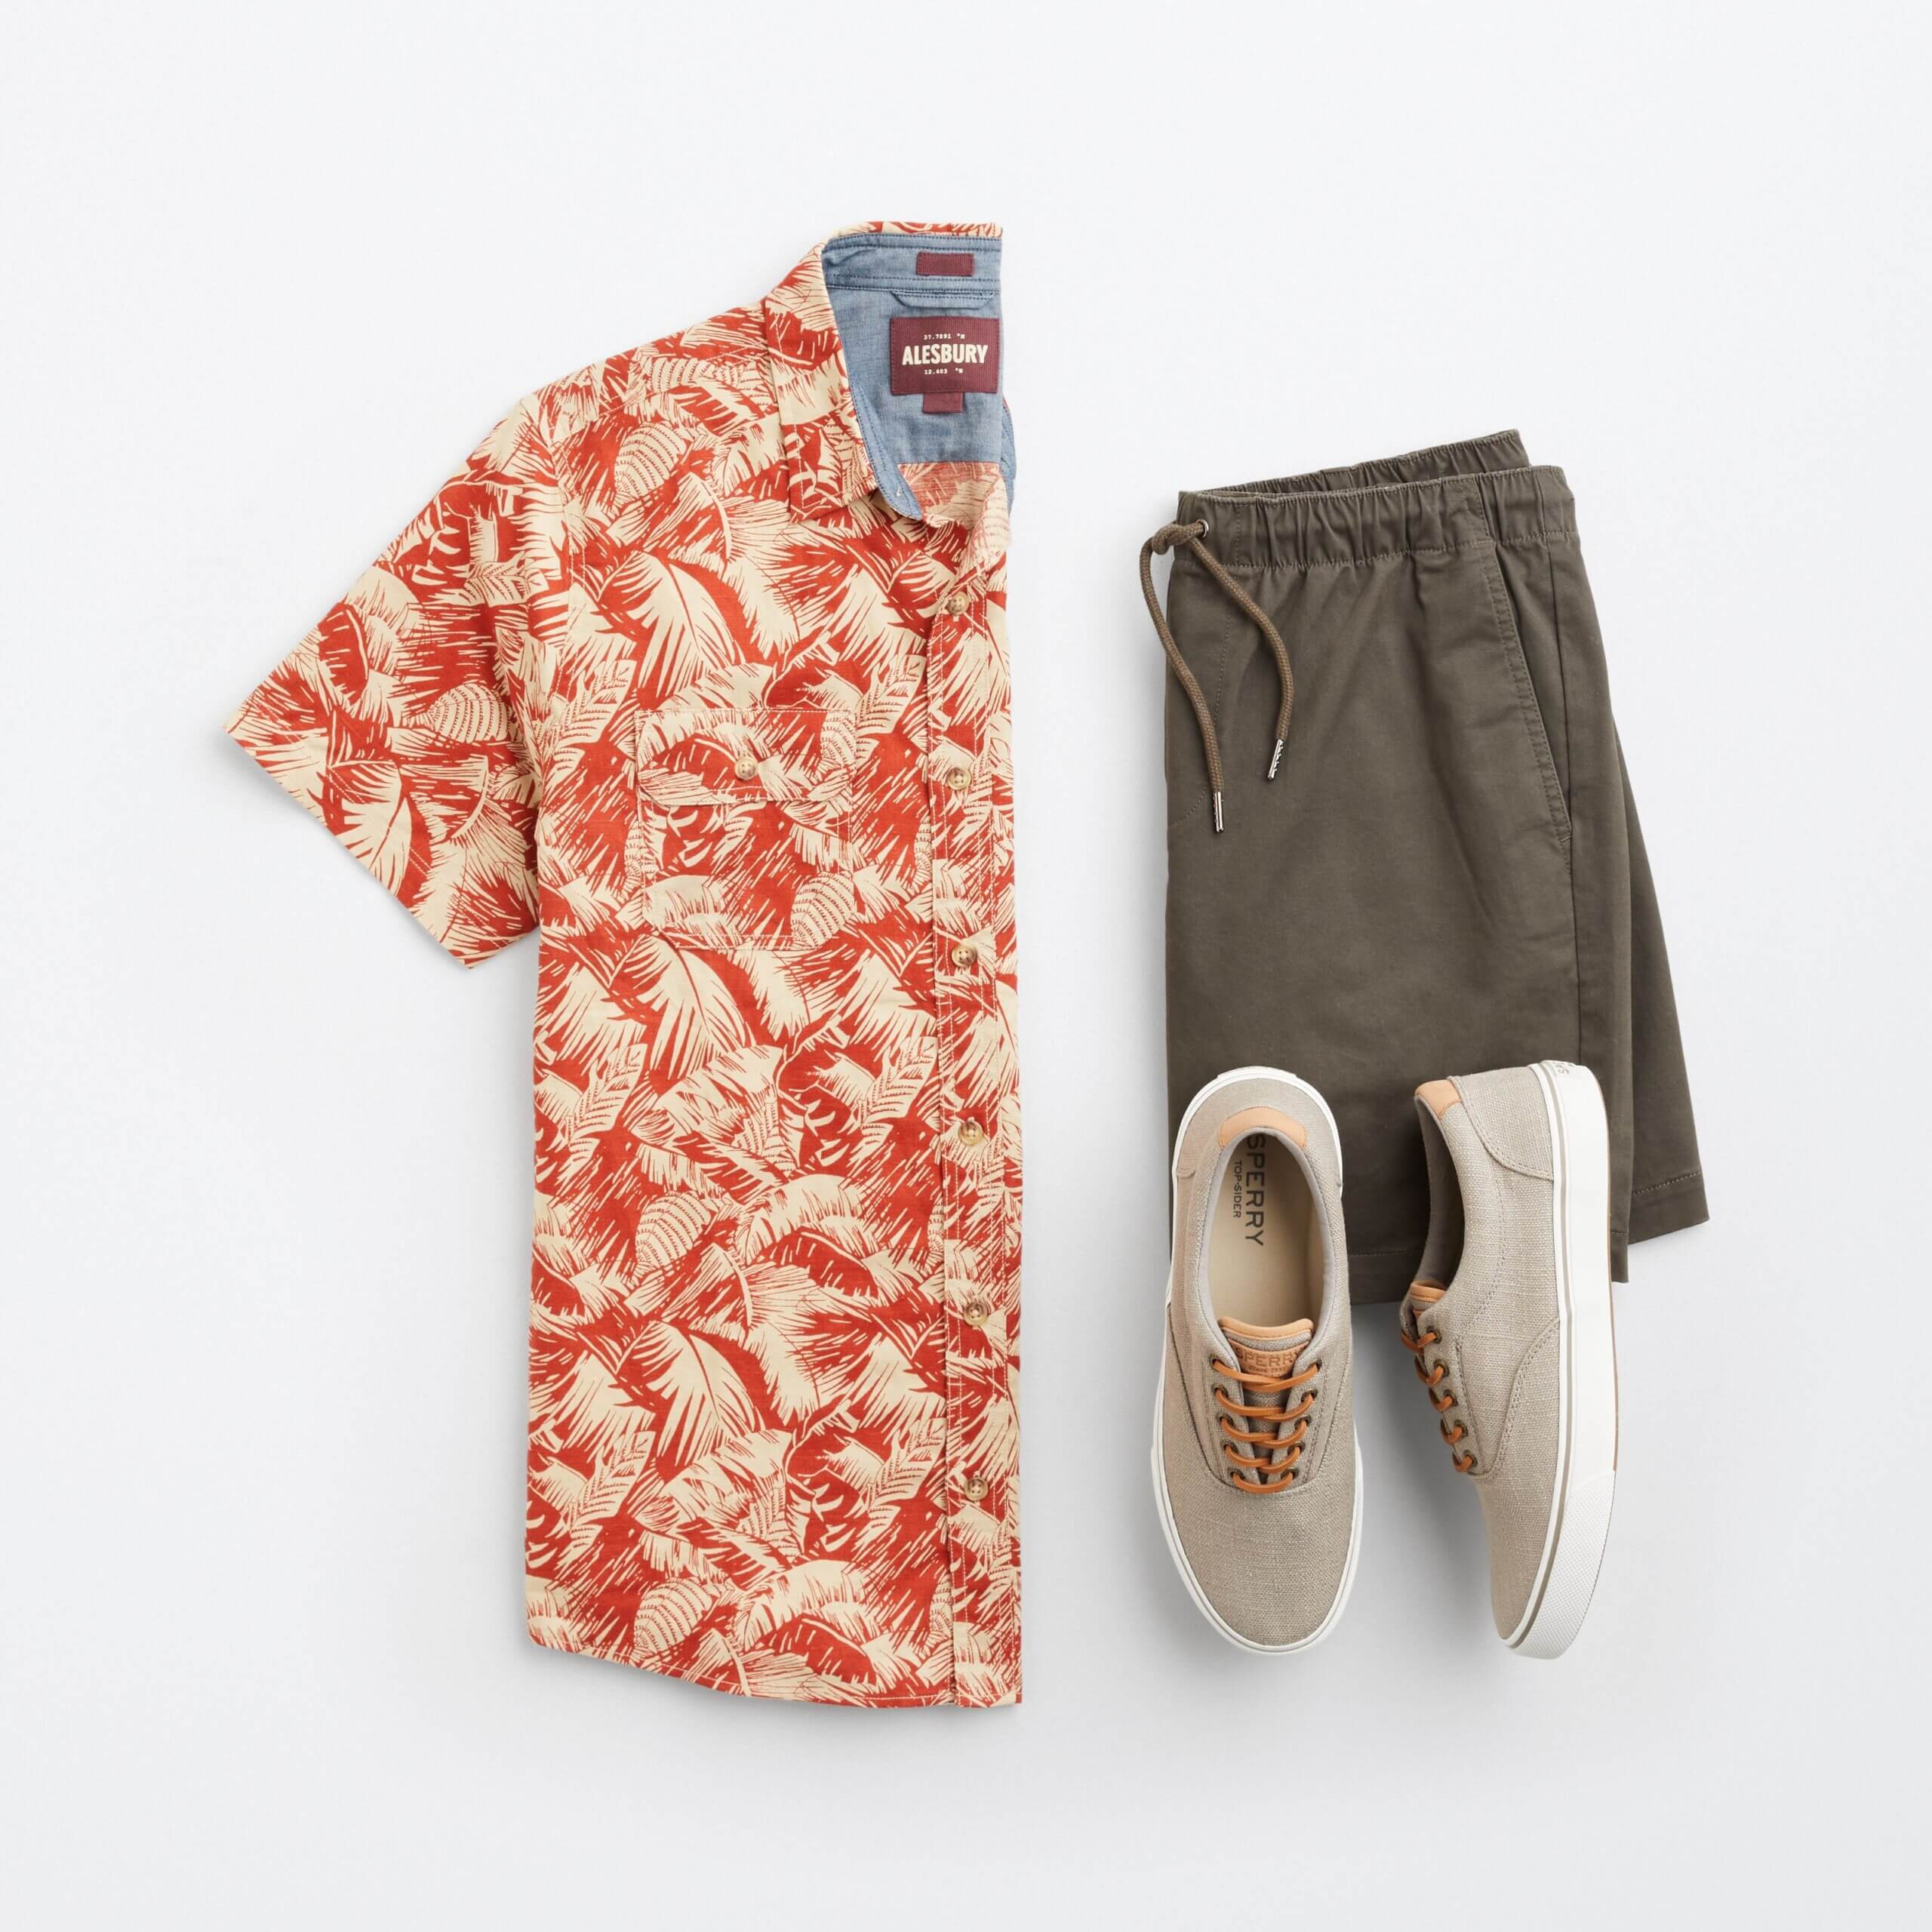 Stitch Fix men's outfit laydown featuring orange tropical button-down shirt, grey shorts and tan sneakers. 